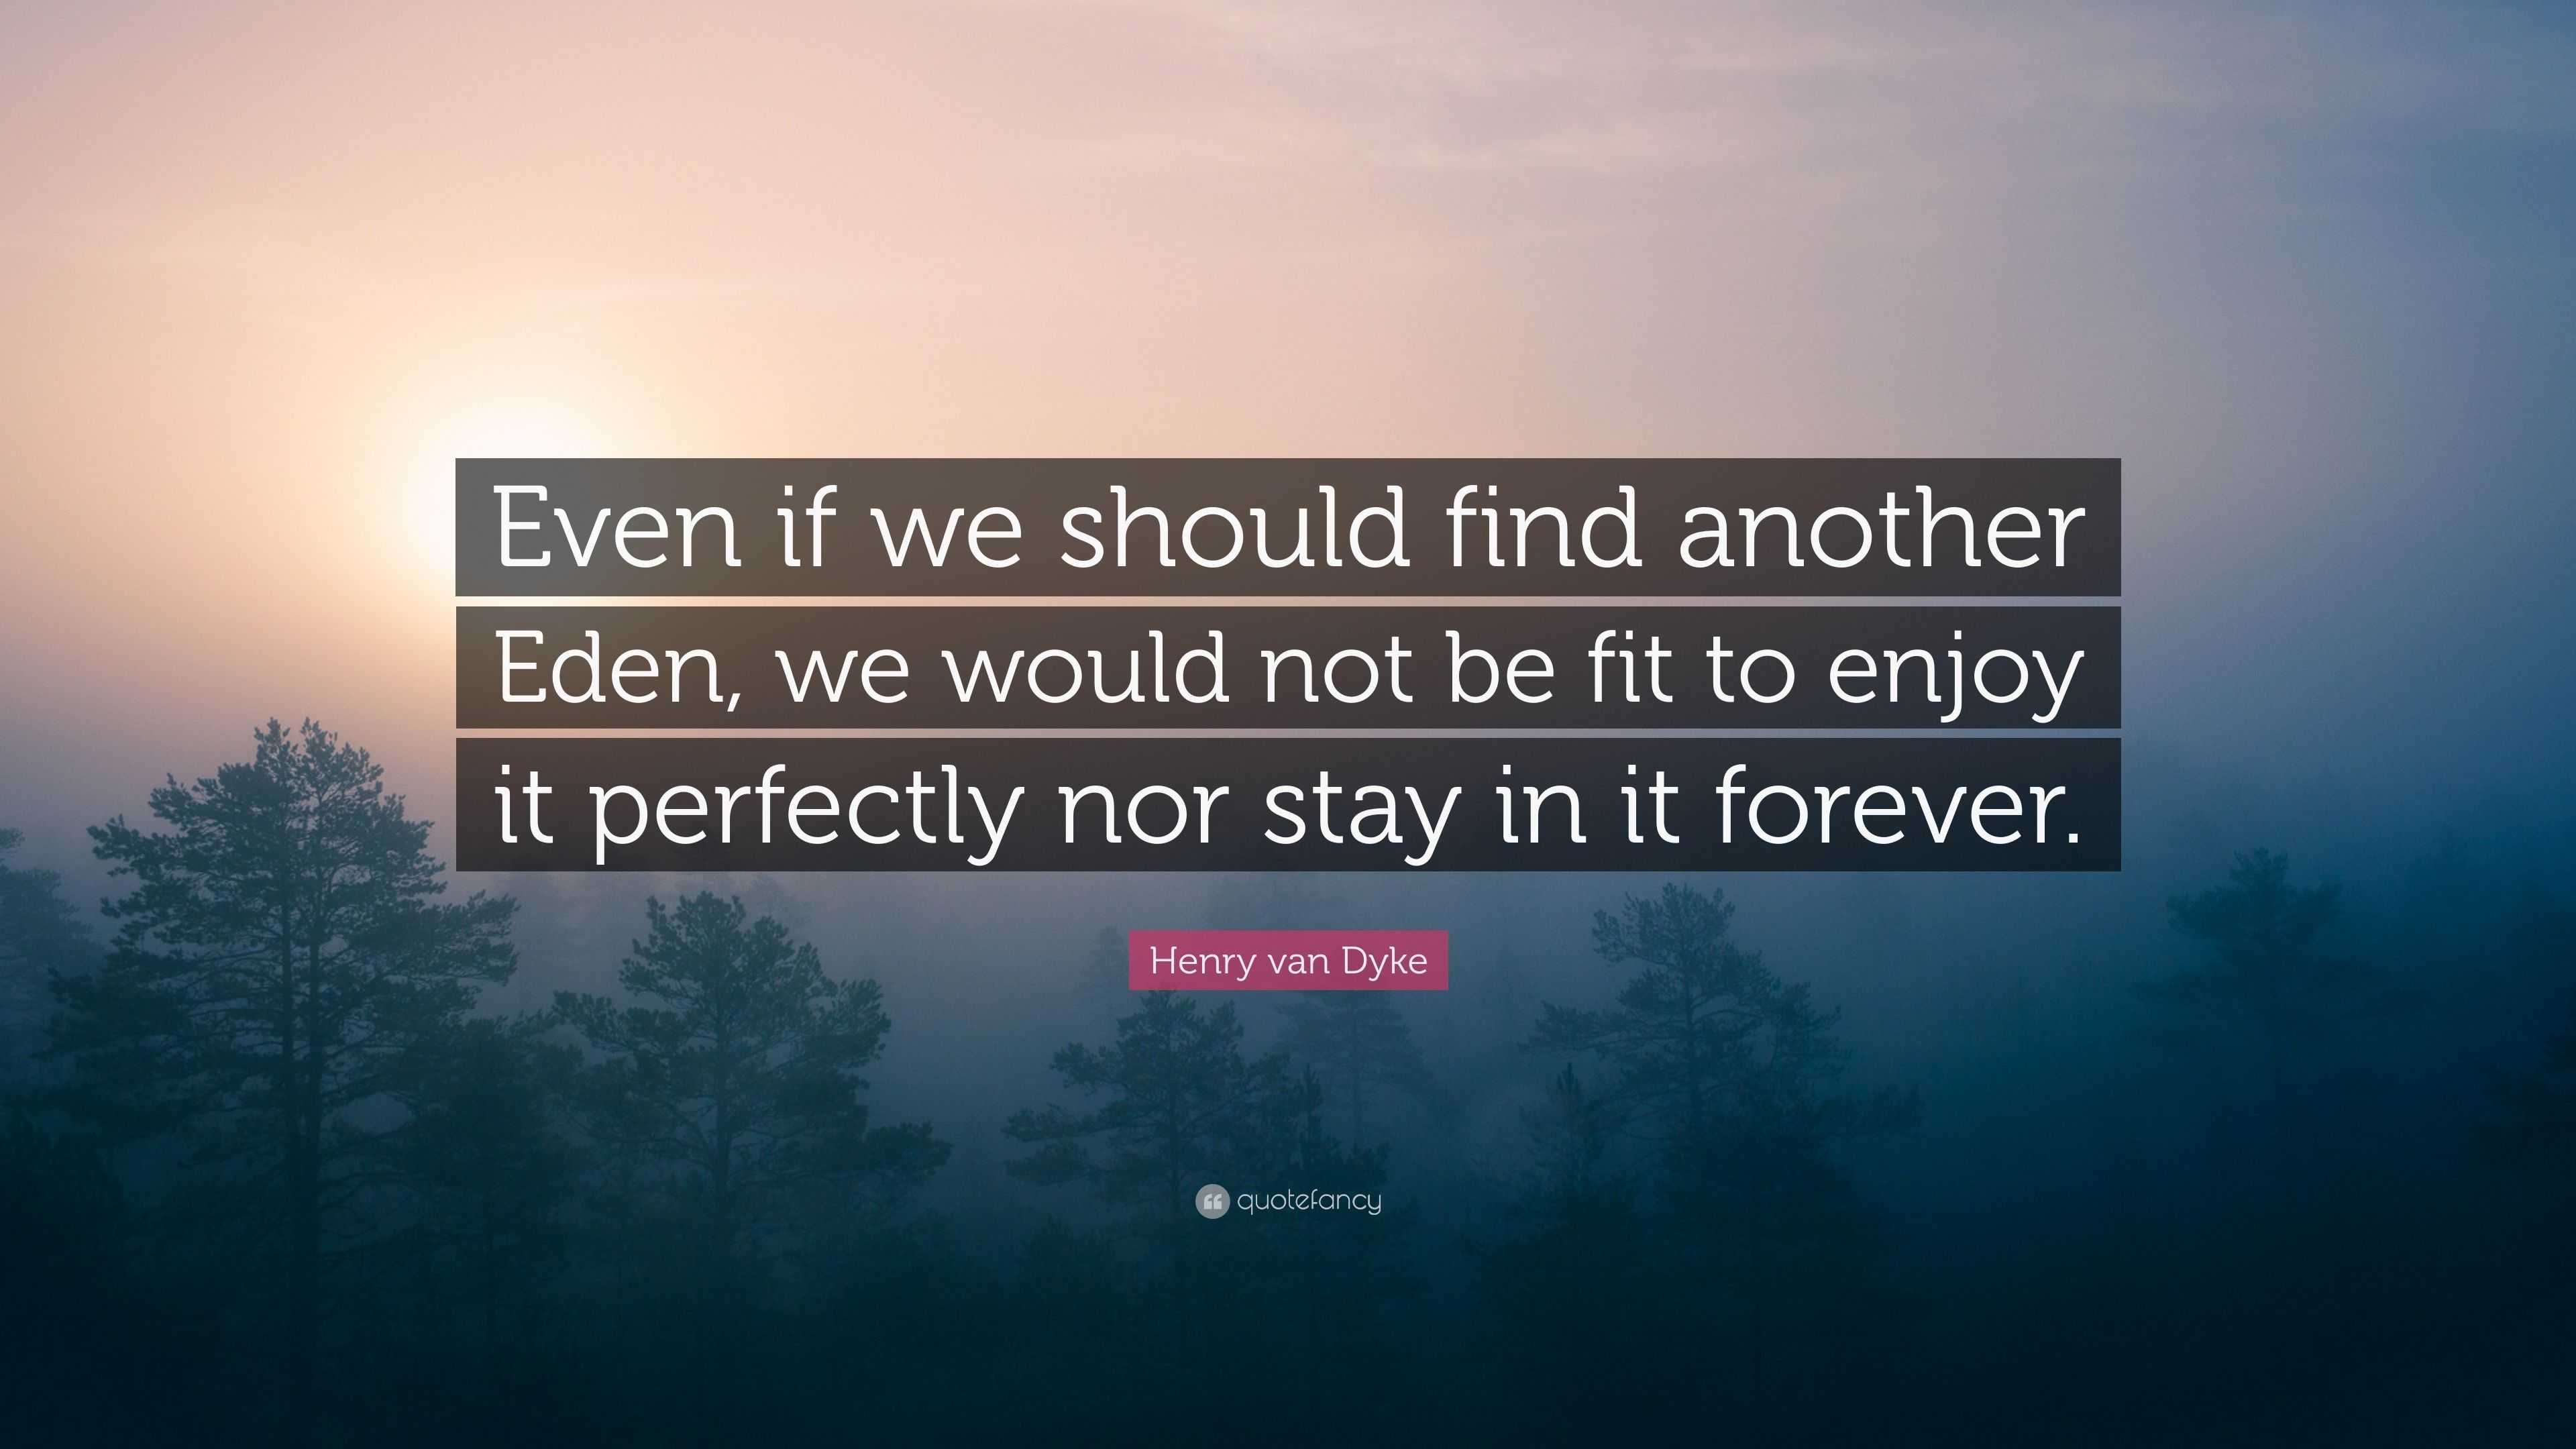 Henry van Dyke Quote: “Even if we should find another Eden, we would ...